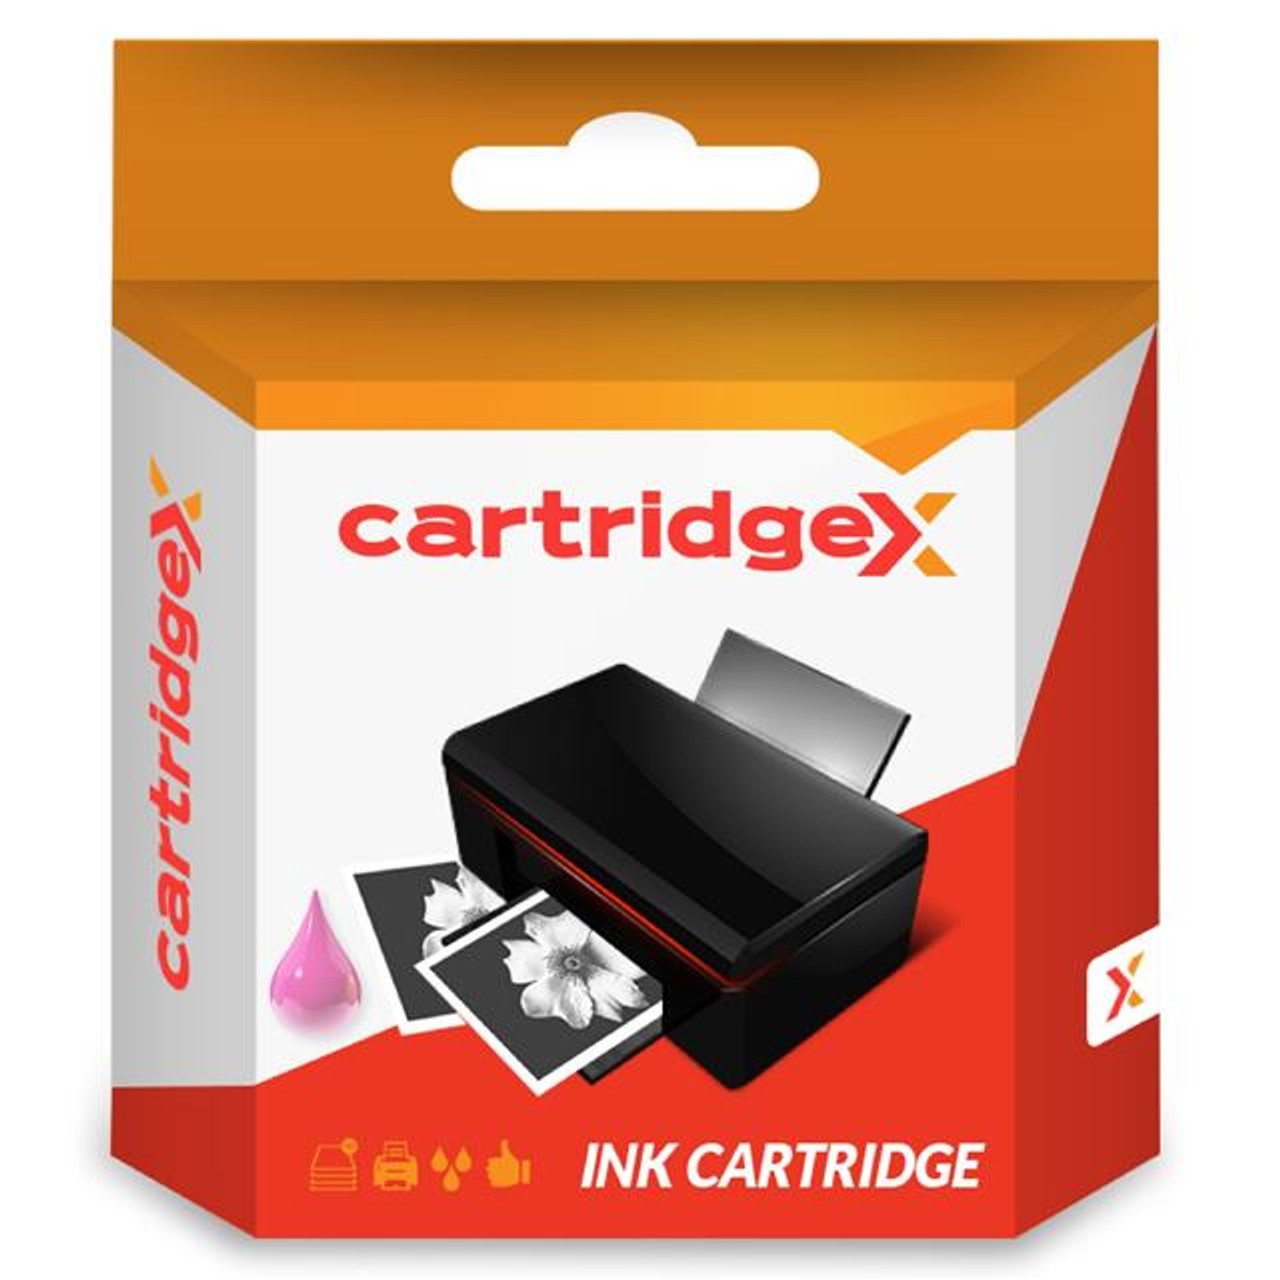 Compatible Light Black Ink Cartridge Compatible With Epson Stylus Pro 9800 7880 7800